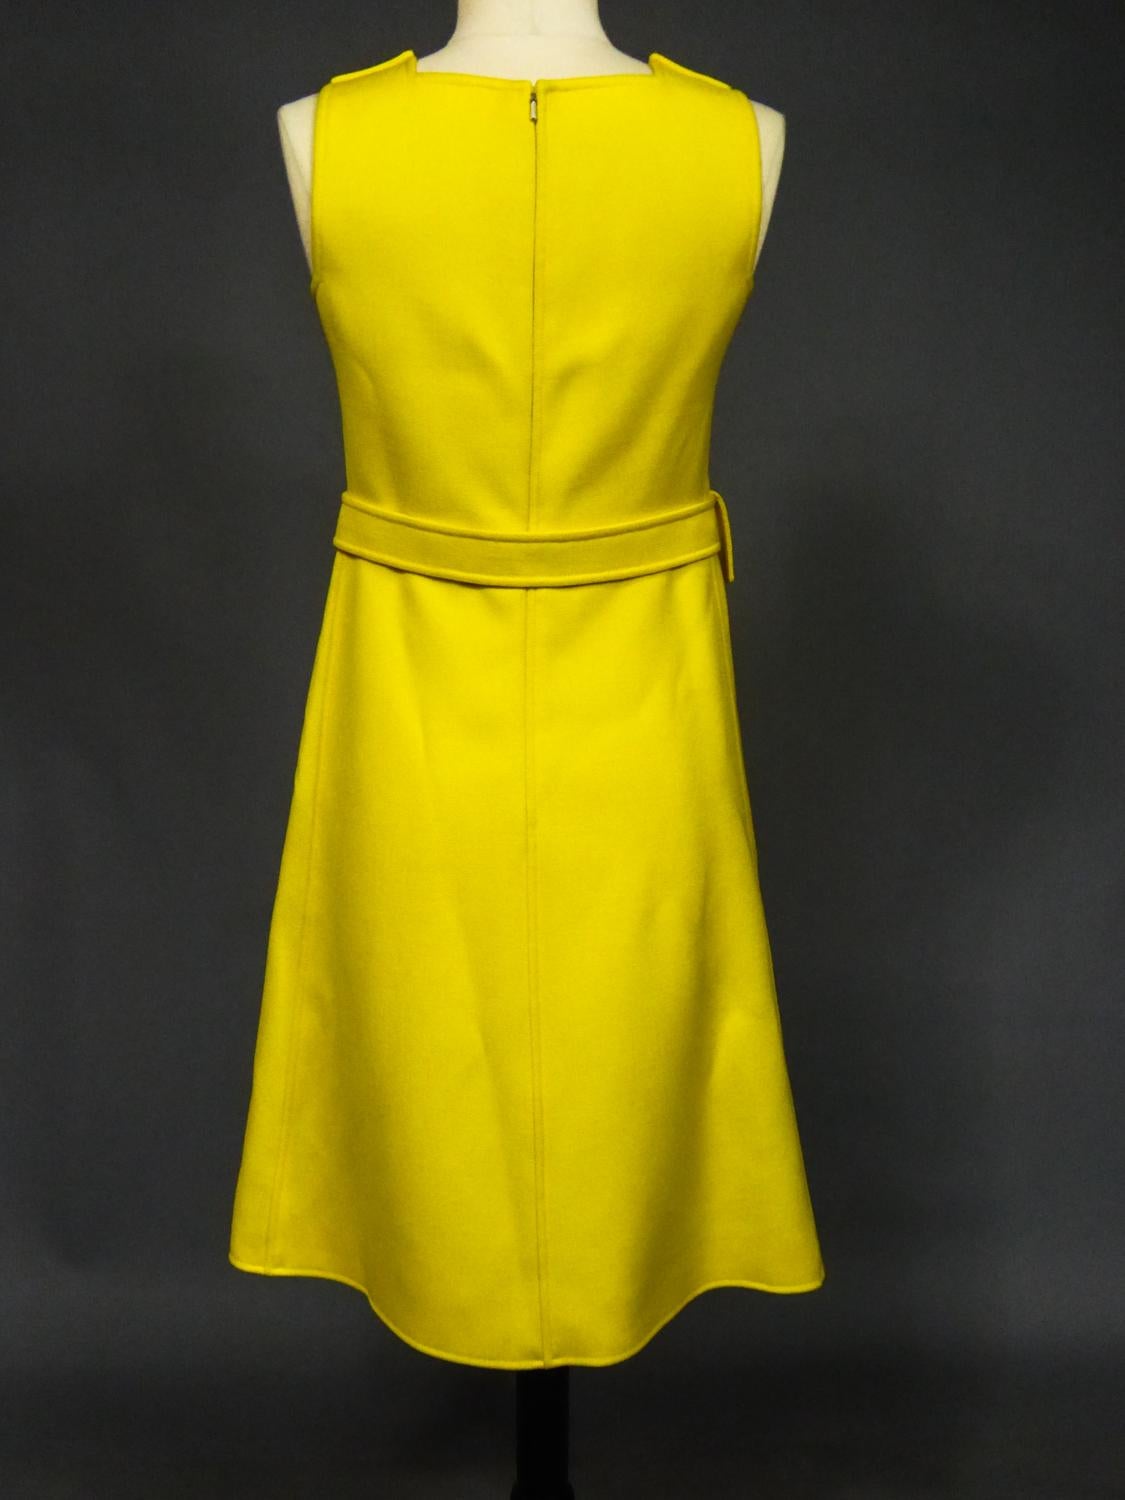 A Chasuble Mini Dress André Courrèges Haute Couture n° 102322 French Circa 1968 6